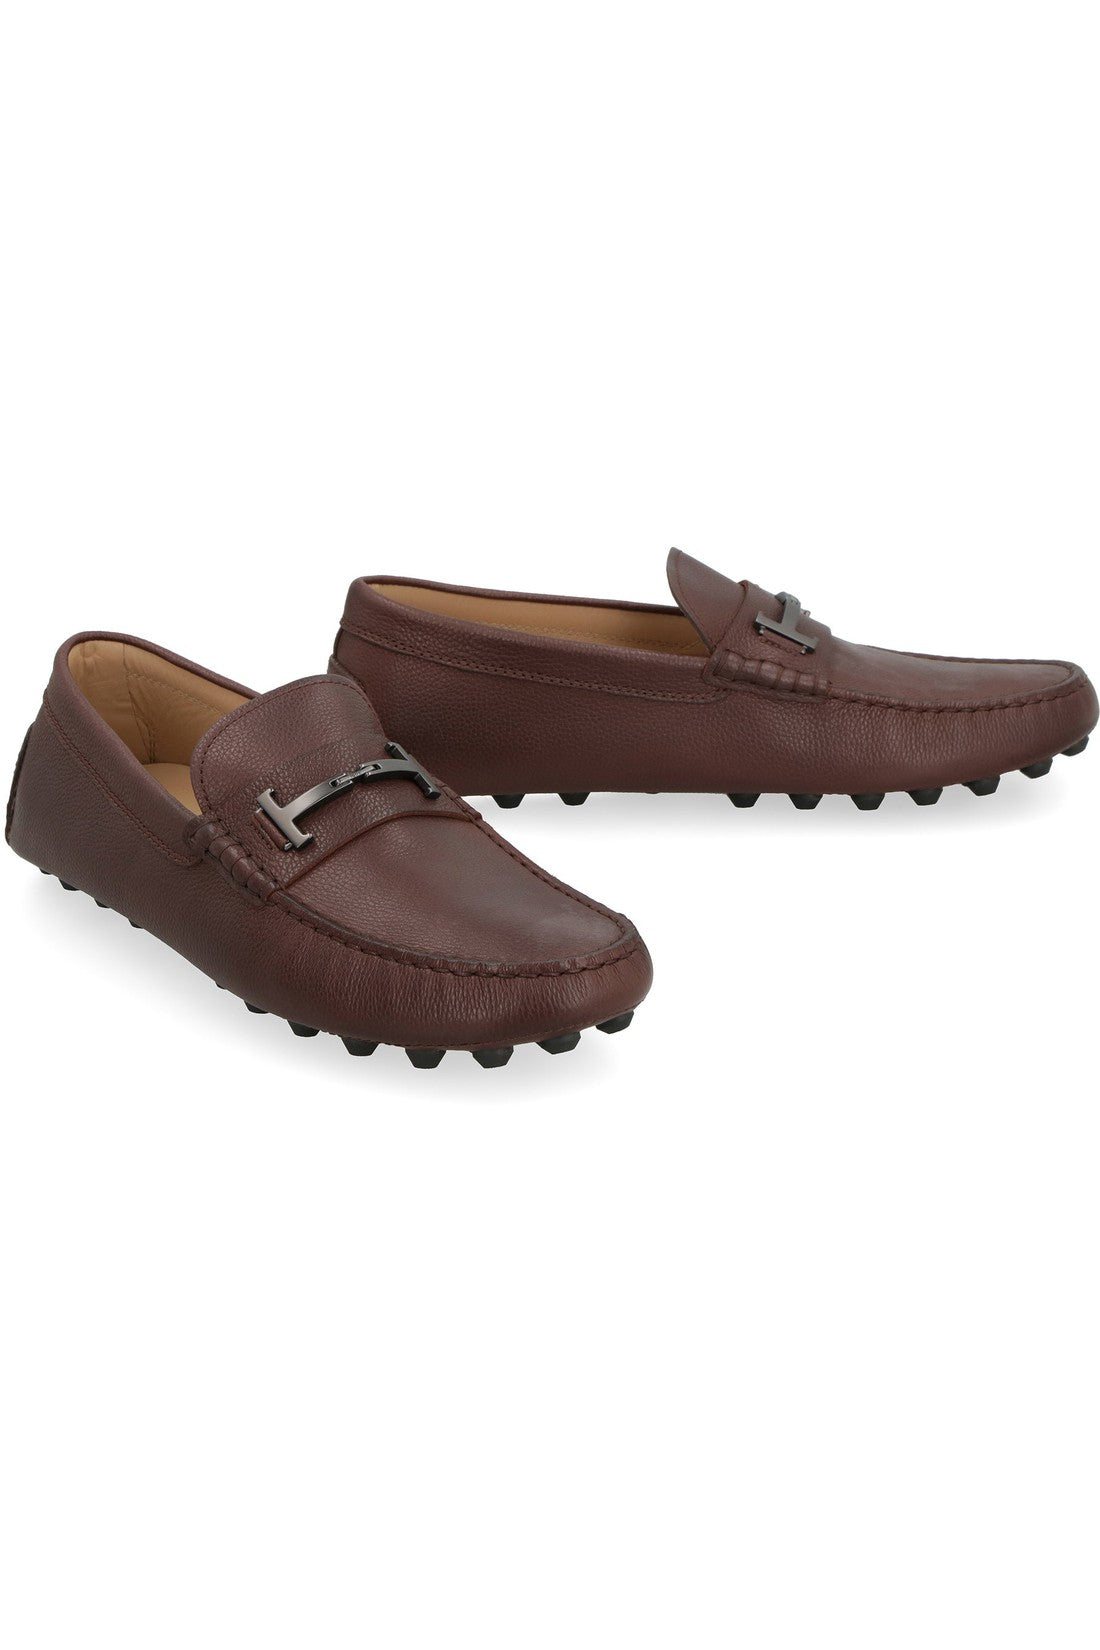 Tod's-OUTLET-SALE-Leather loafers-ARCHIVIST